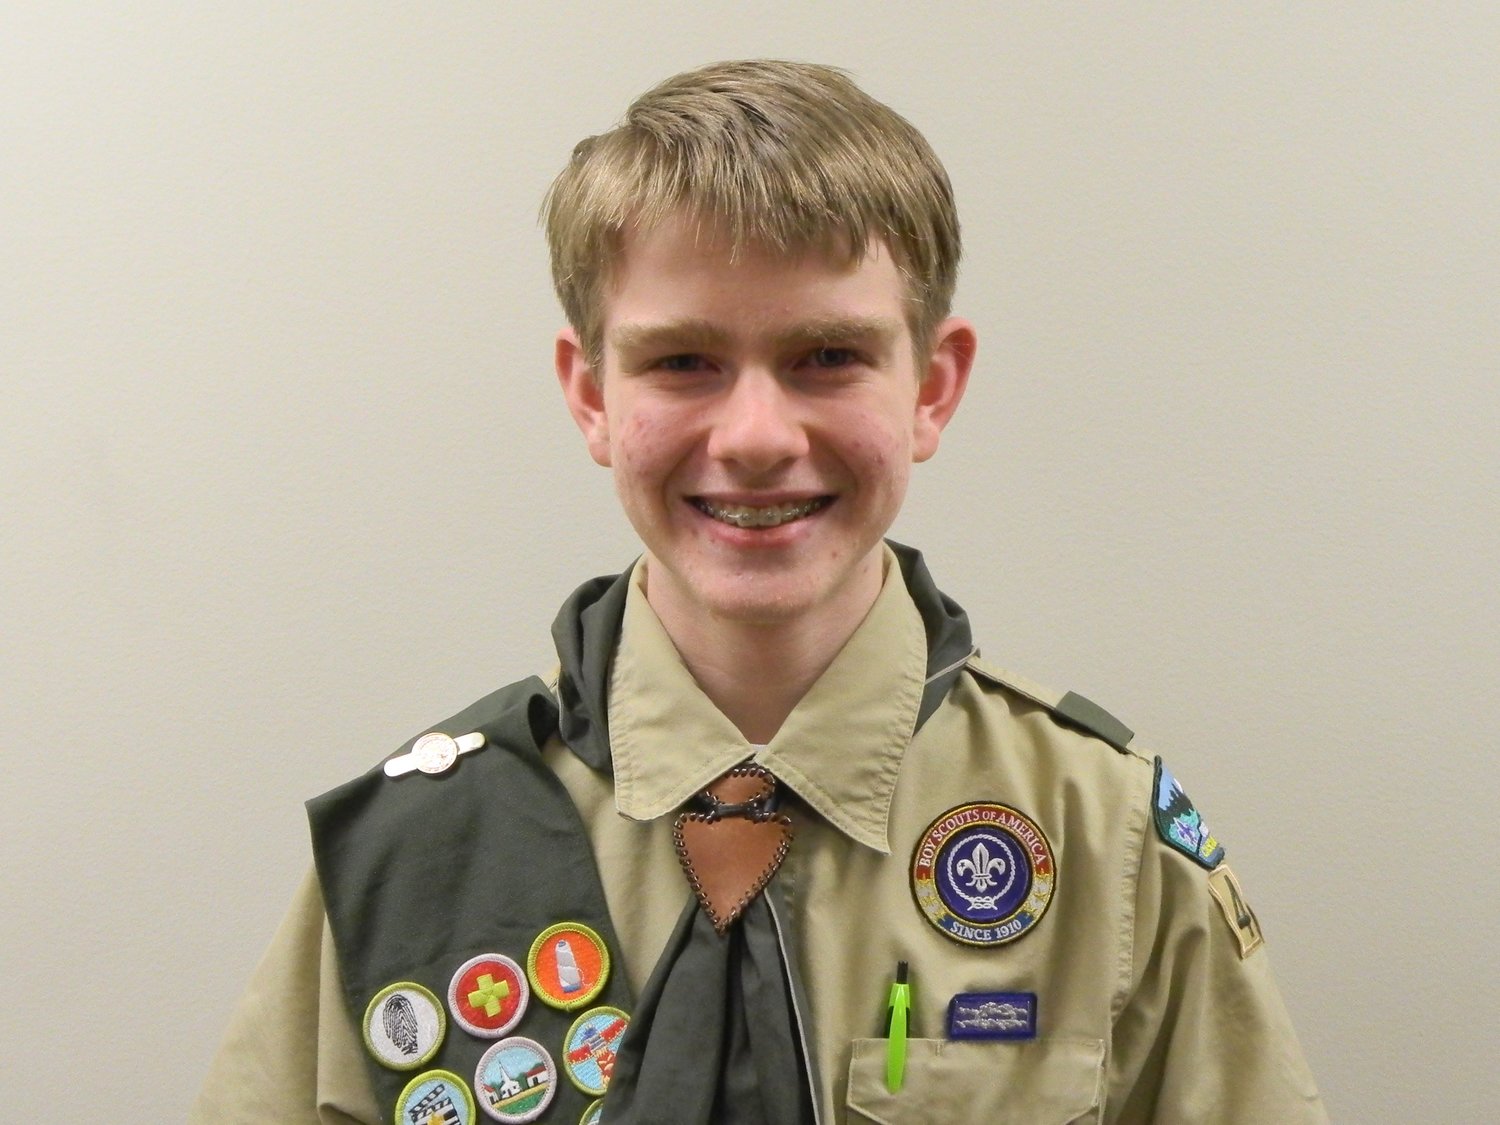 Nicholas Kevin Leetham of Boy Scout Troop 496 led a group of scouts and adult volunteers in building display stands for the Camas Public Library for a total of 92 hours of community service. Nicholas, 15, is the son of Kevin and Amy Leetham. He is a freshman at Camas High School.